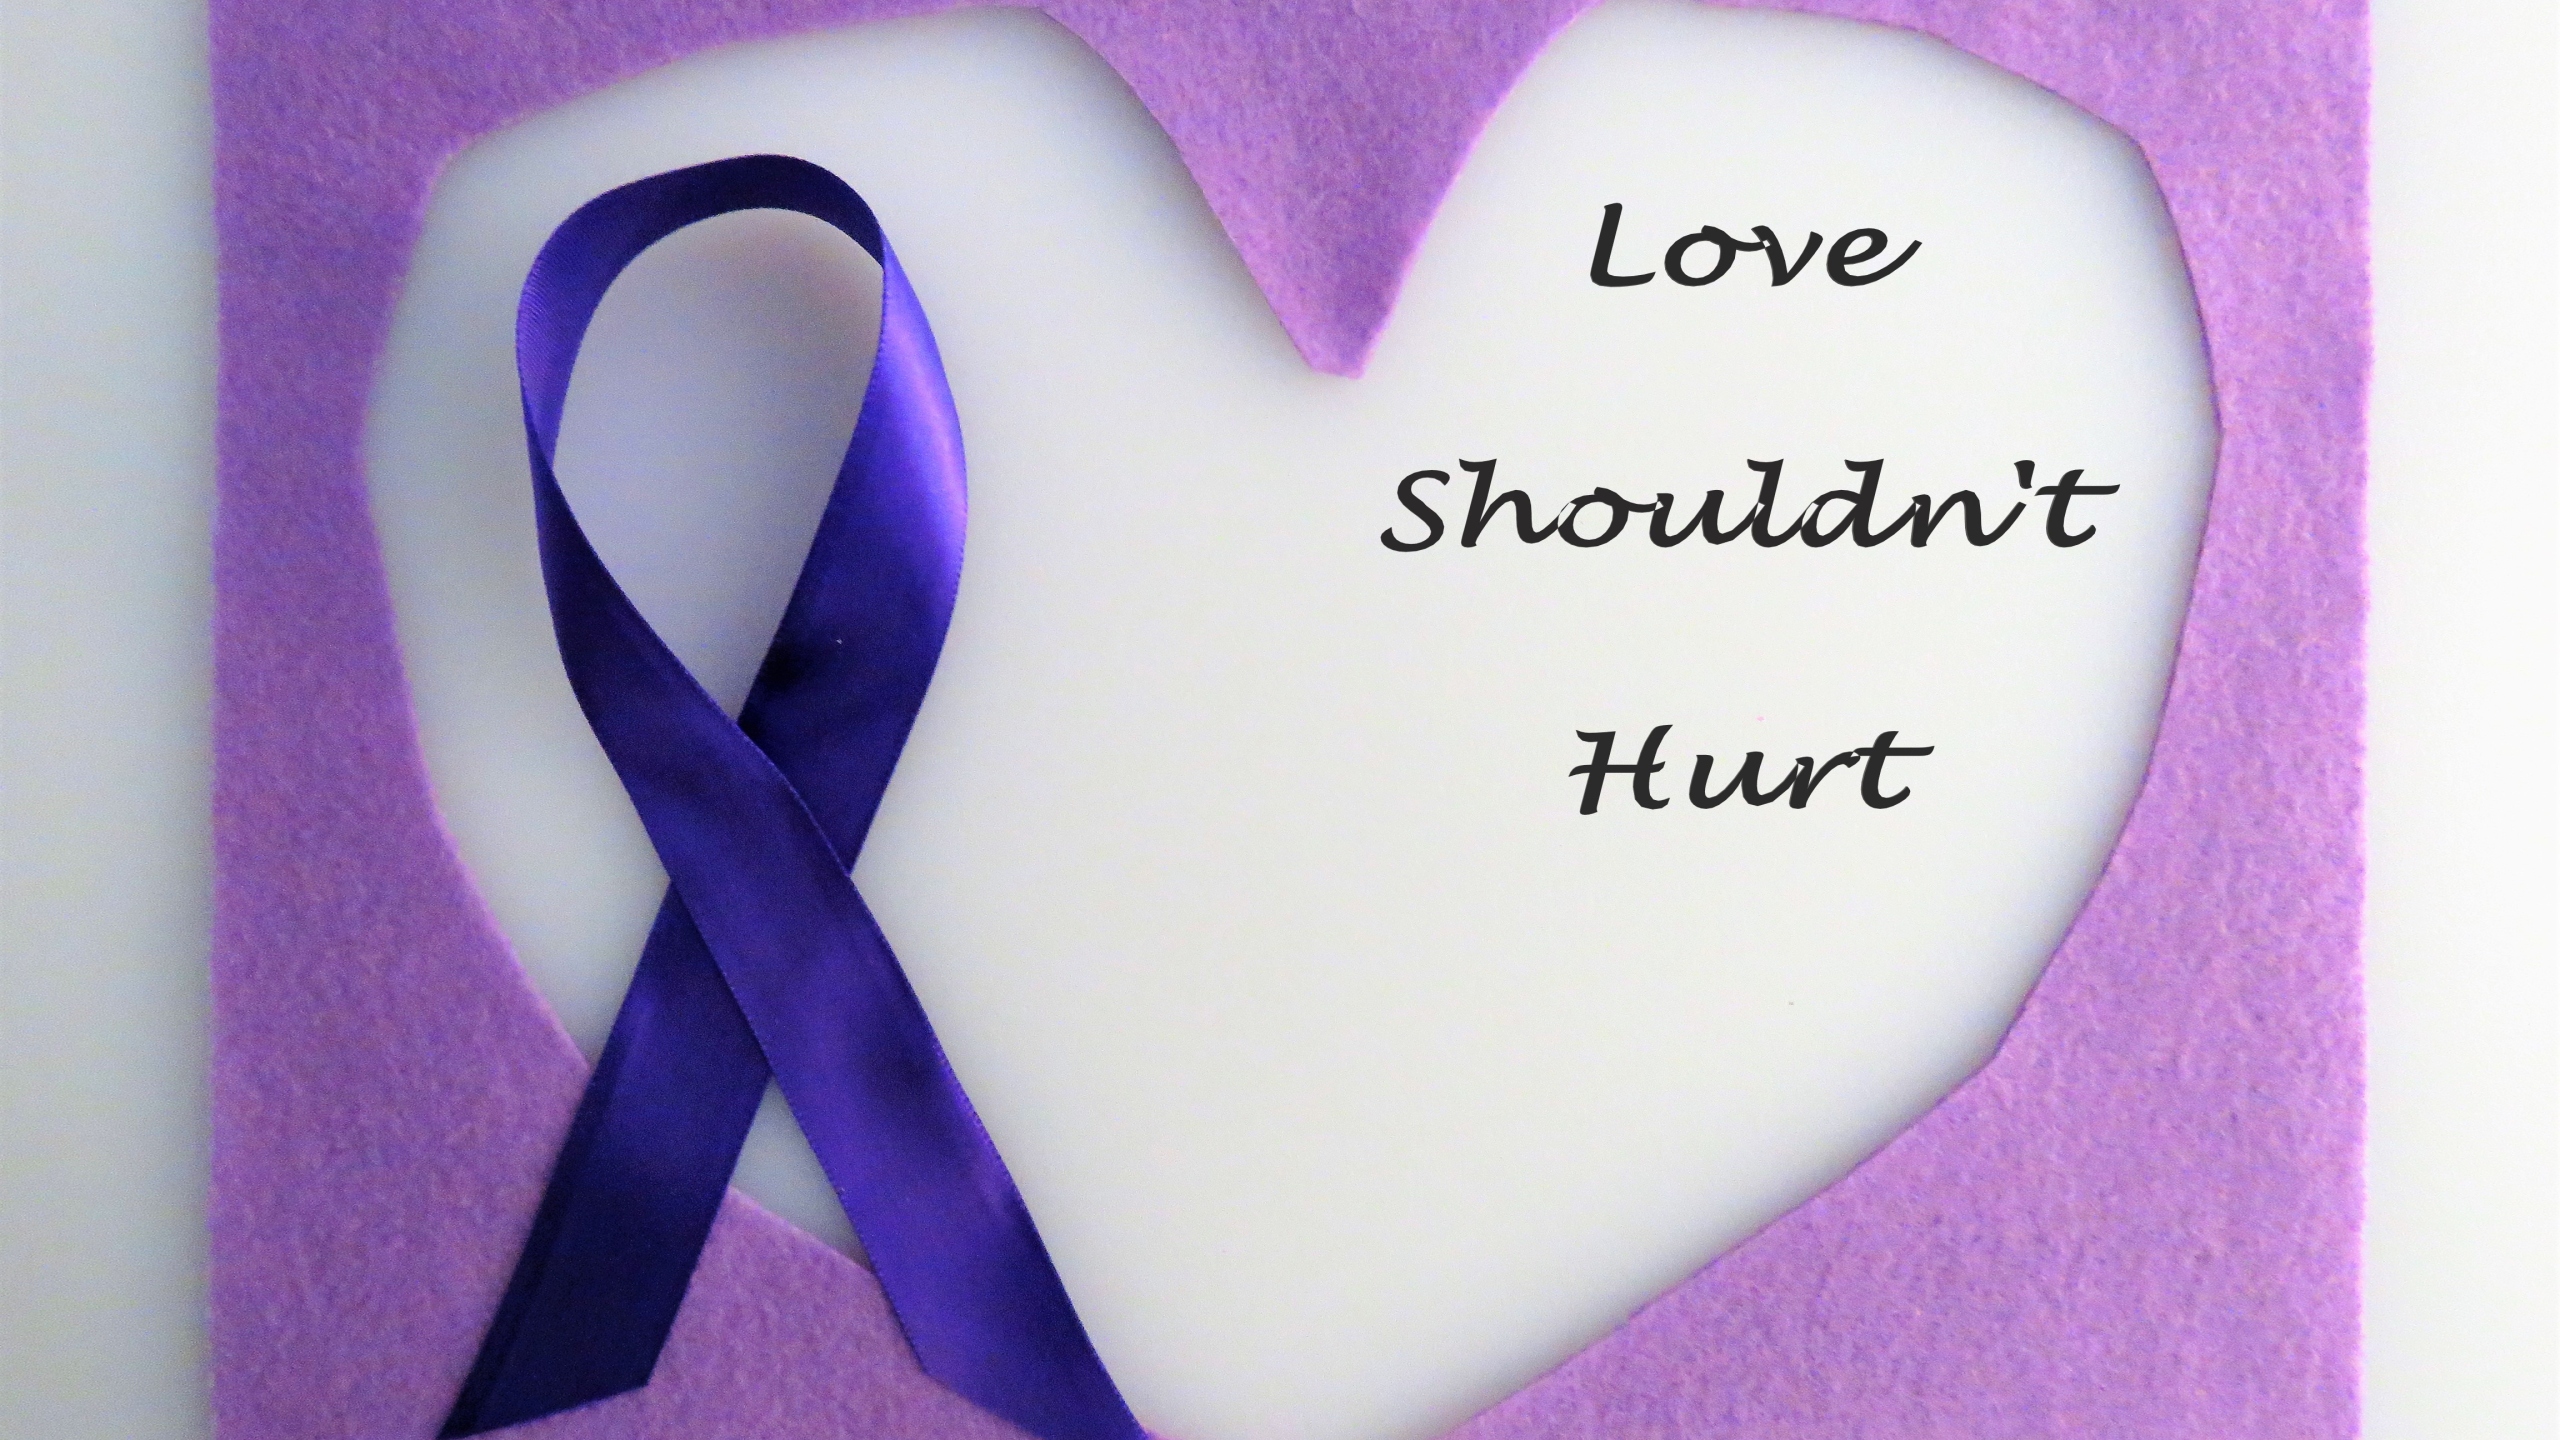 LIST: Resources for victims of domestic violence, abuse